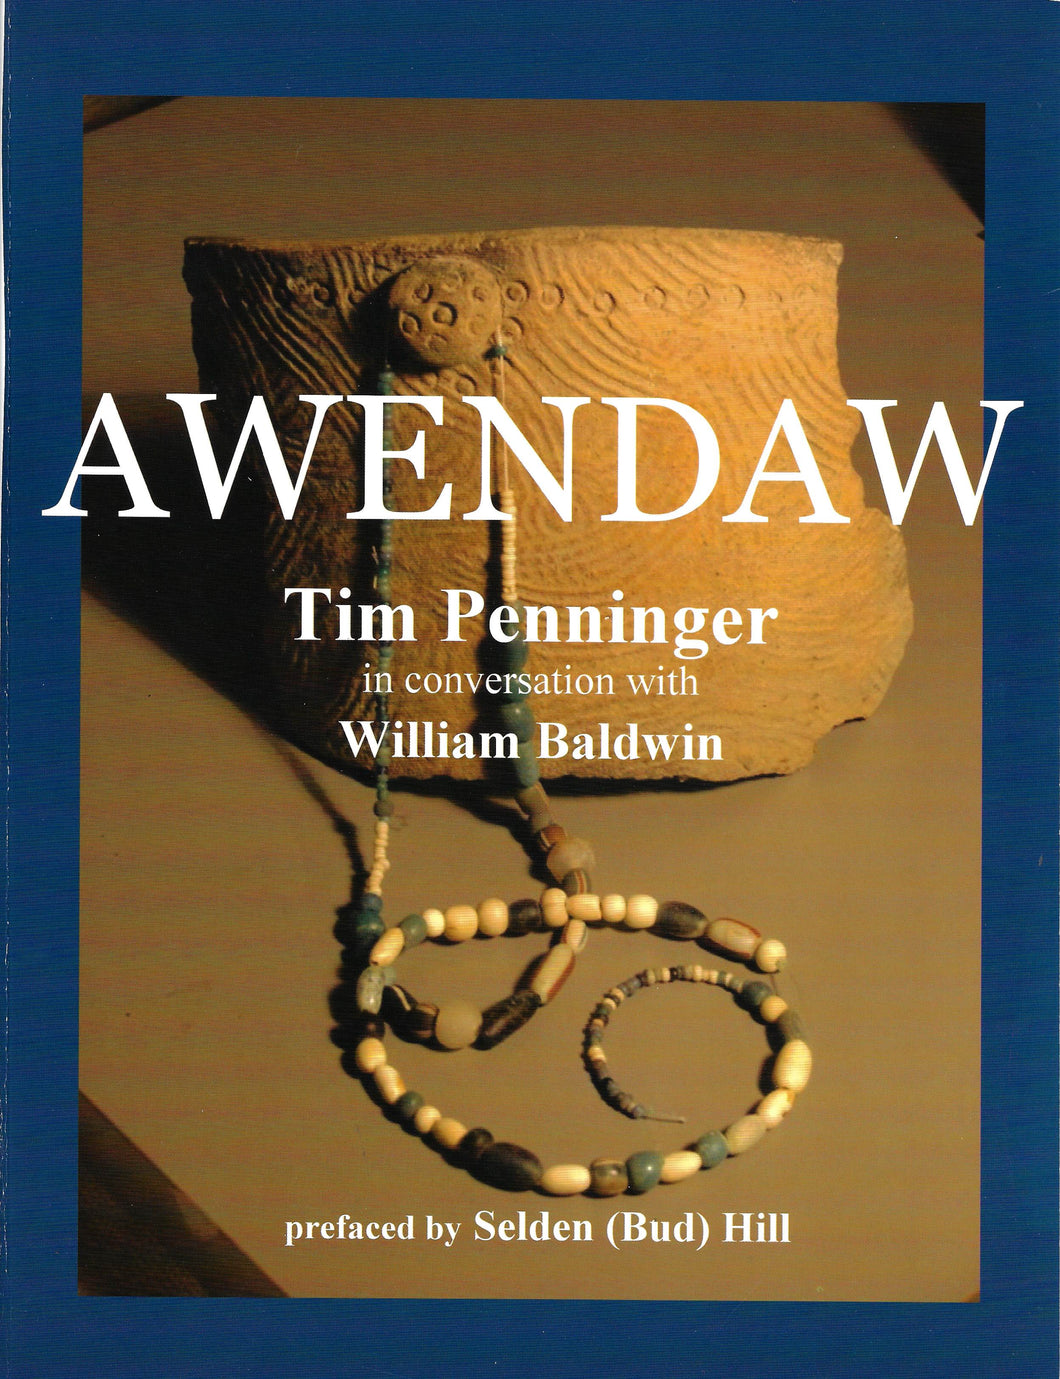 Awendaw ~ Tim Penninger in Conversation with William Baldwin